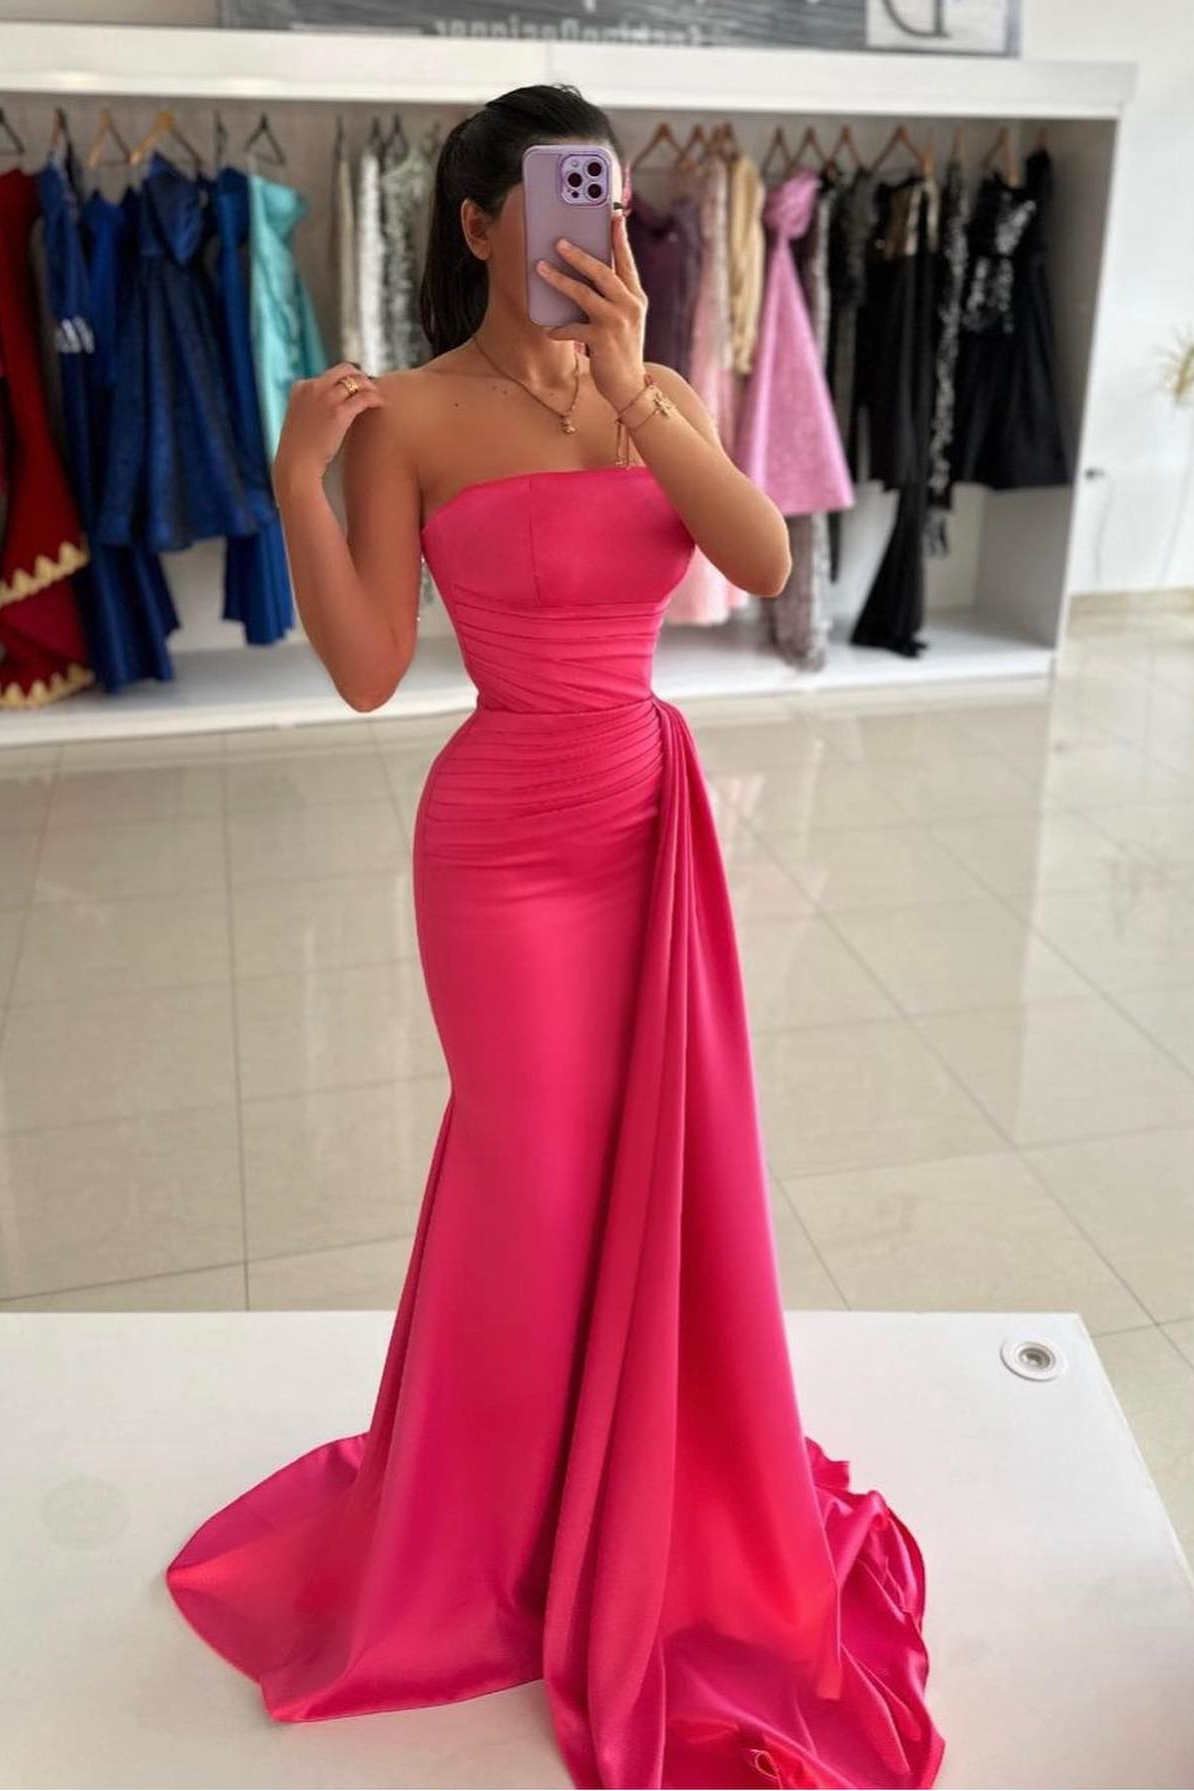  New Arrival Strapless Mermaid Evening Gown Long Split With Ruffle - lulusllly